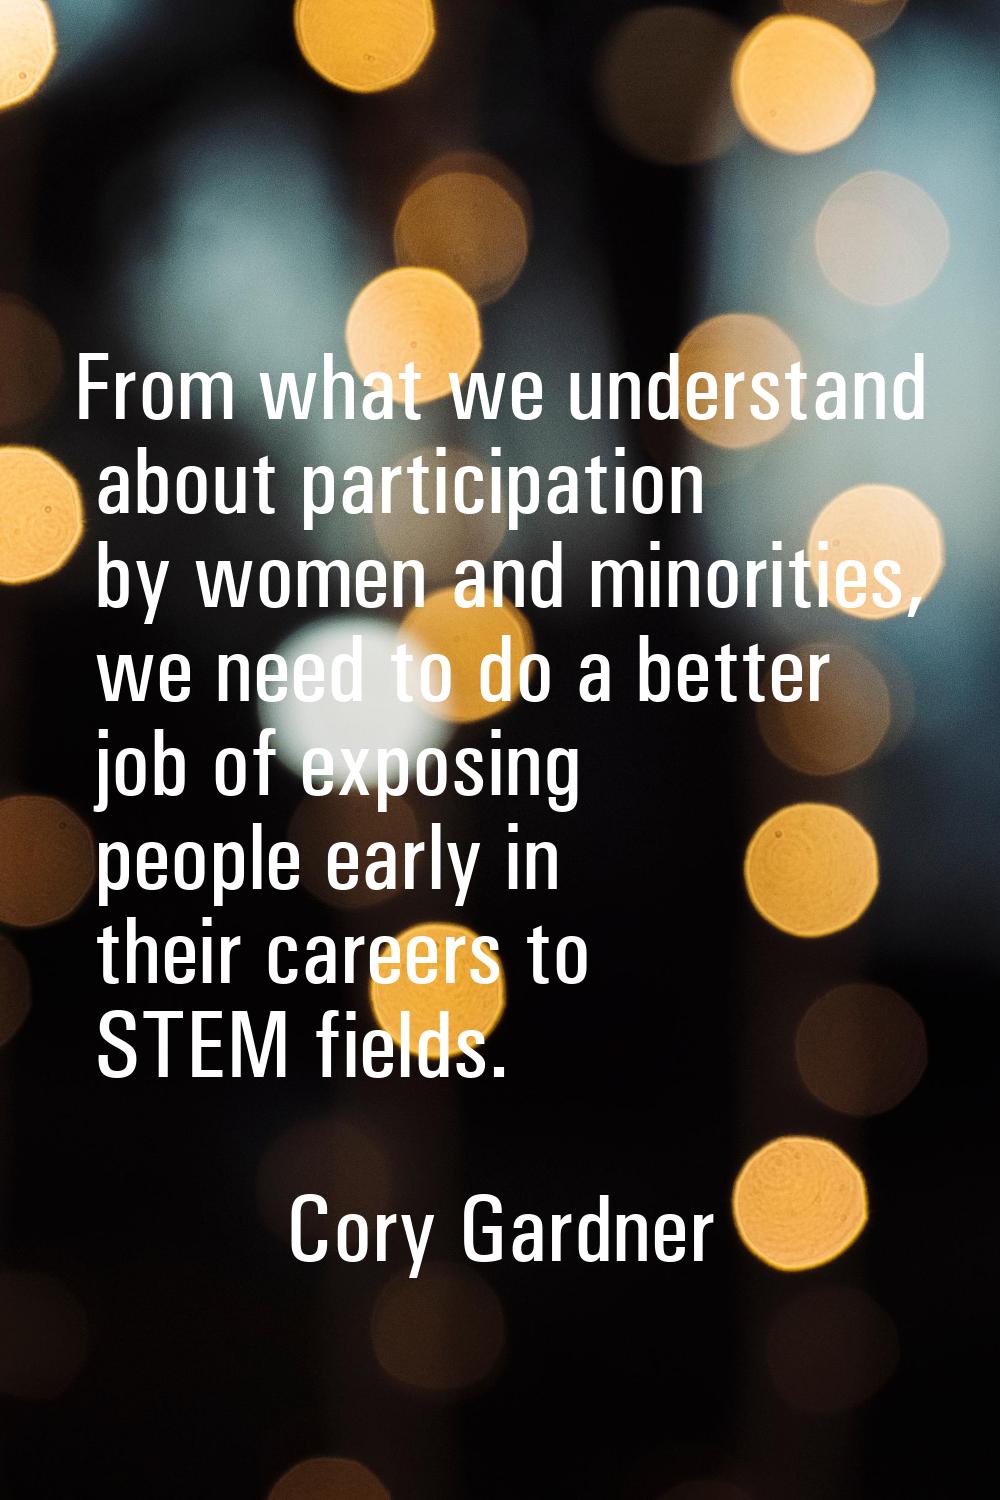 From what we understand about participation by women and minorities, we need to do a better job of 